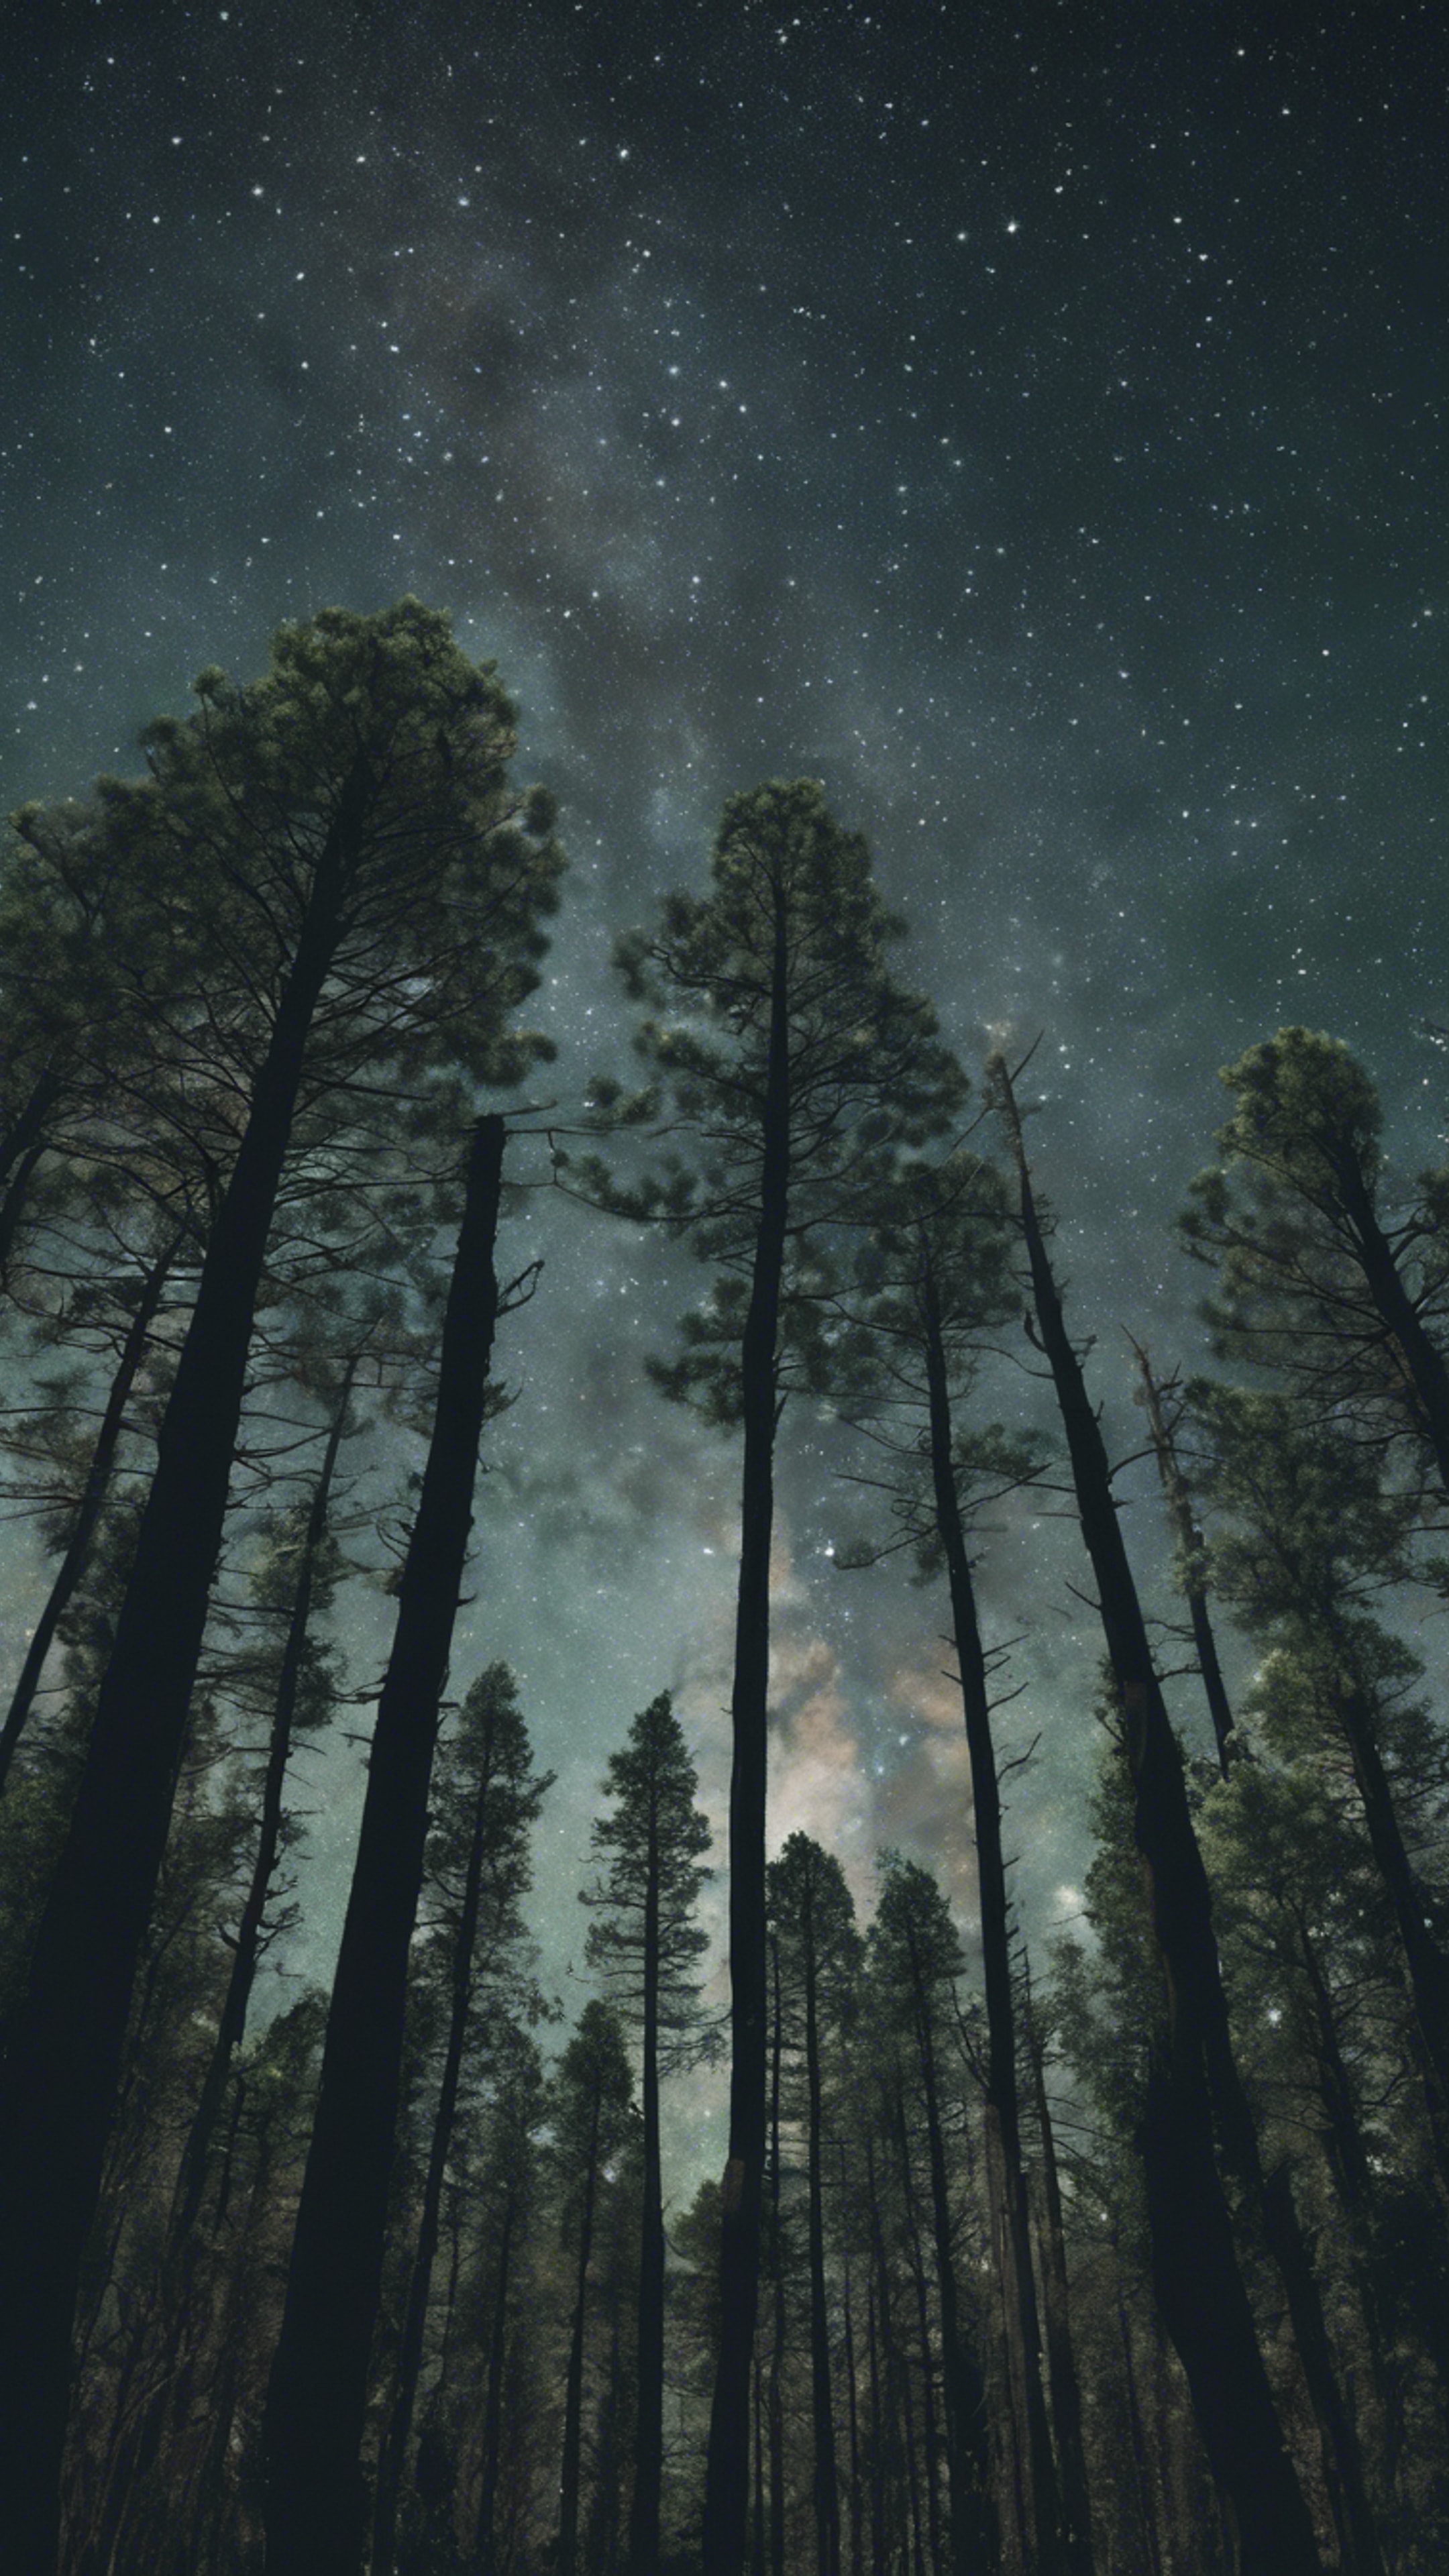 A wilderness scene with tall, dark green pine trees occluding the stars.壁紙[a450718e497a48169b60]